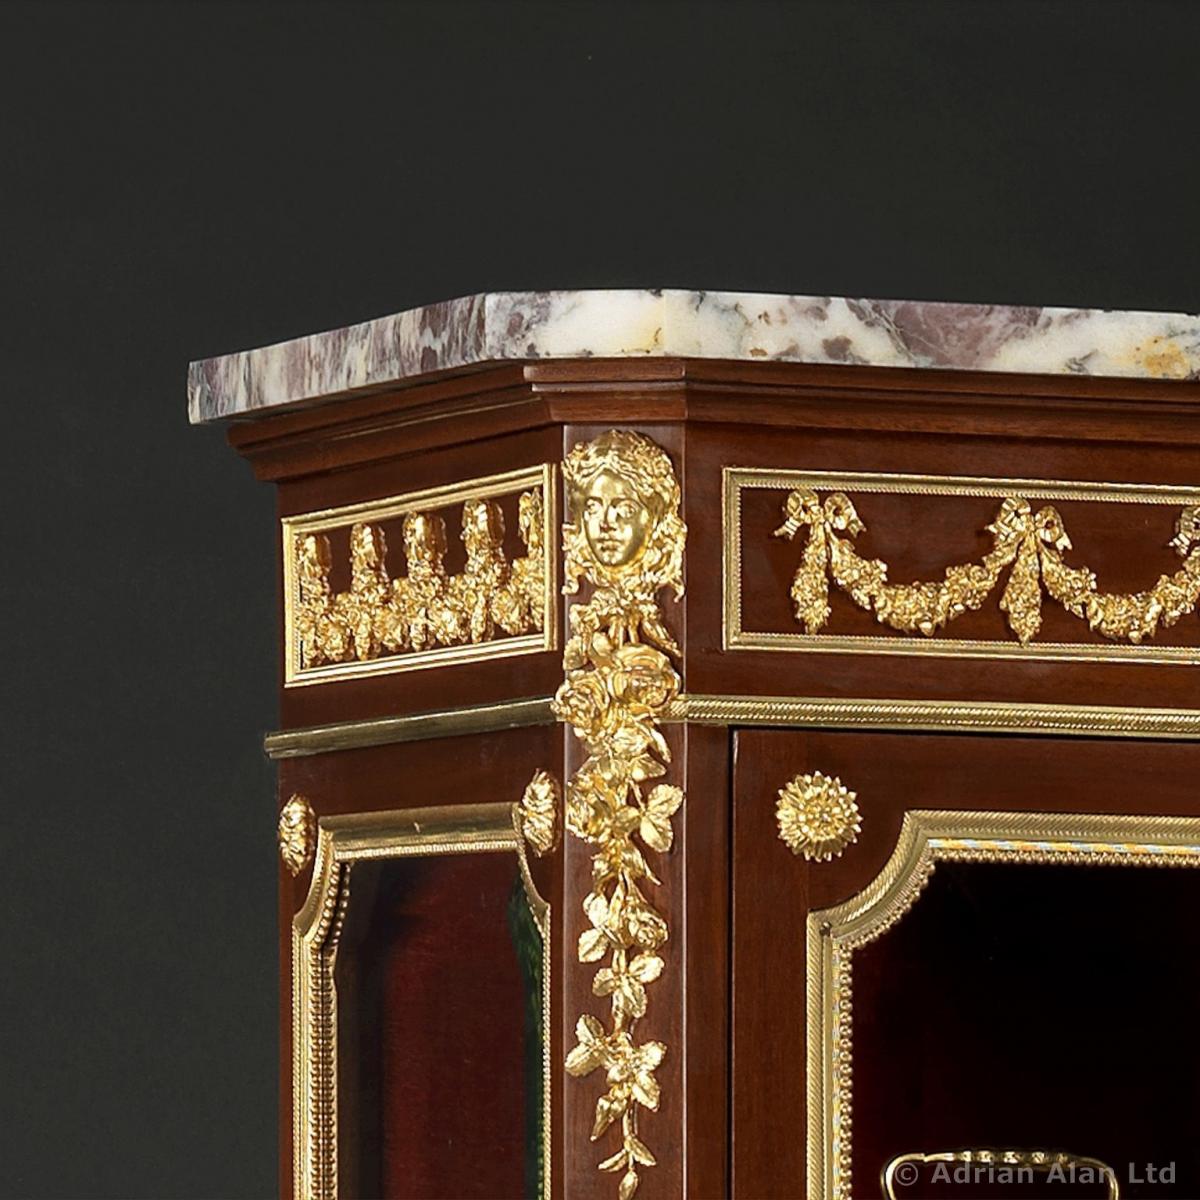 A Gilt-Bronze Mounted Mahogany Vitrine, the bronze by Picard